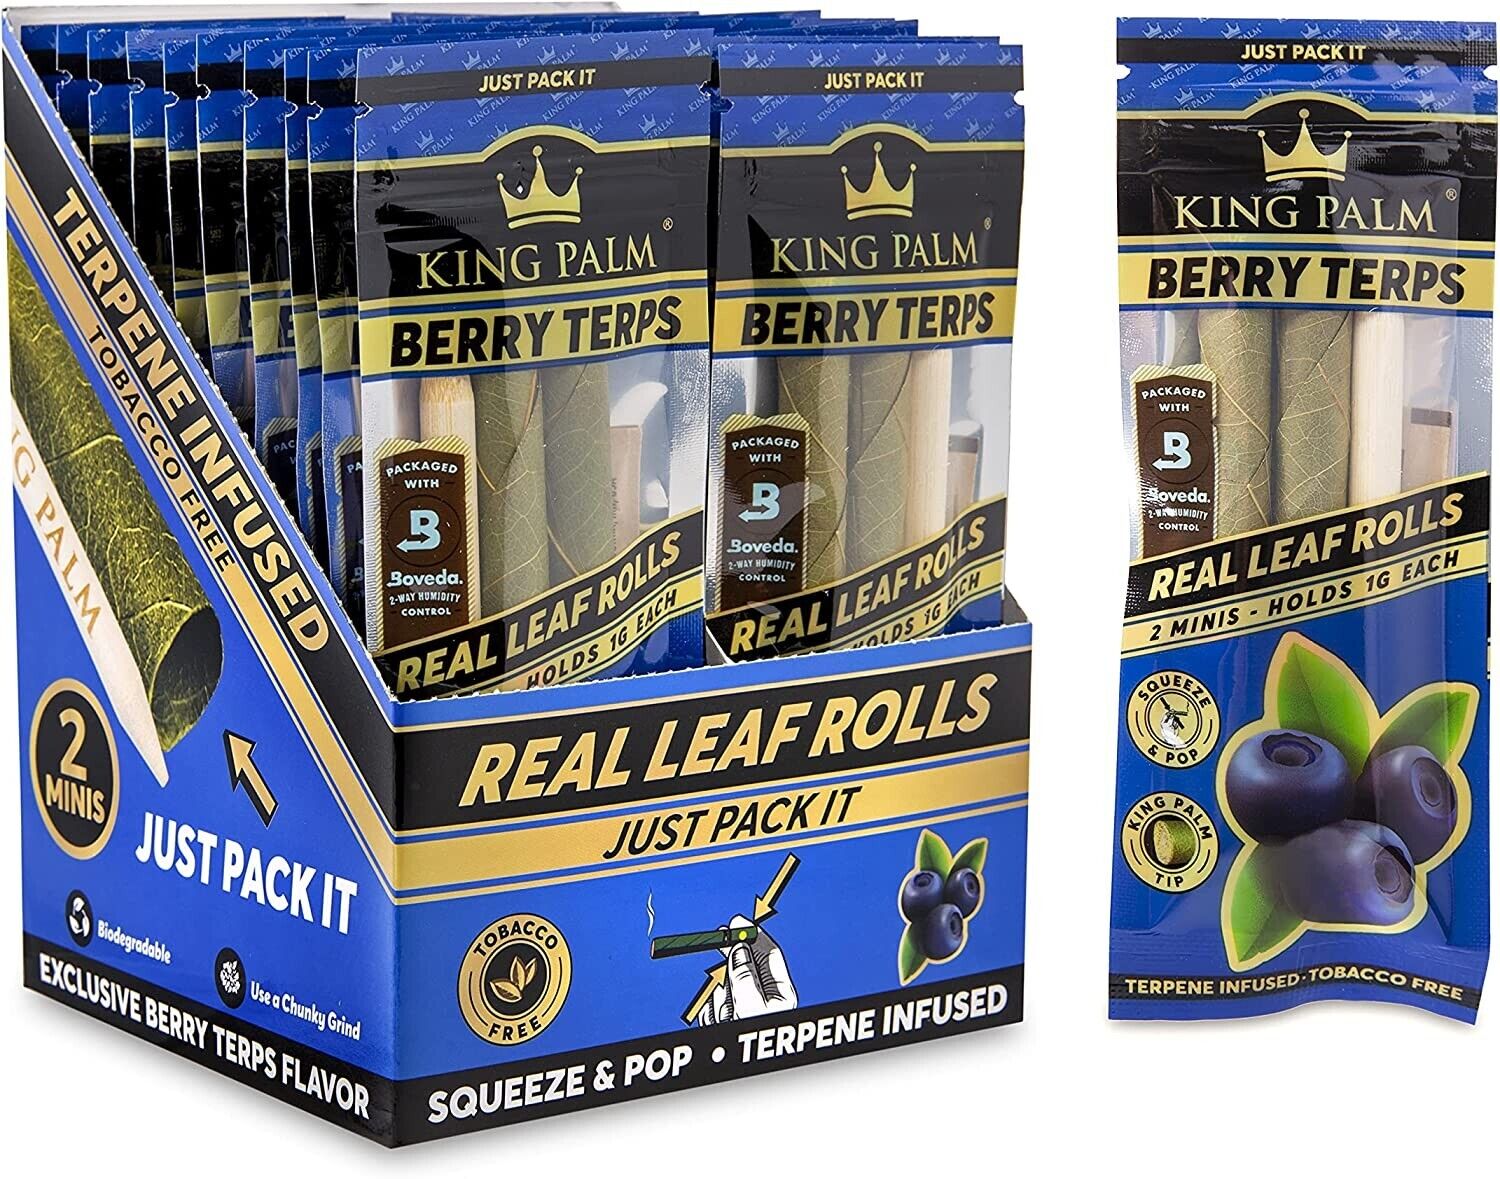 King Palm | Mini | Berry Terps | Palm Leaf Rolls | 20 Packs of 2 Each = 40 Rolls